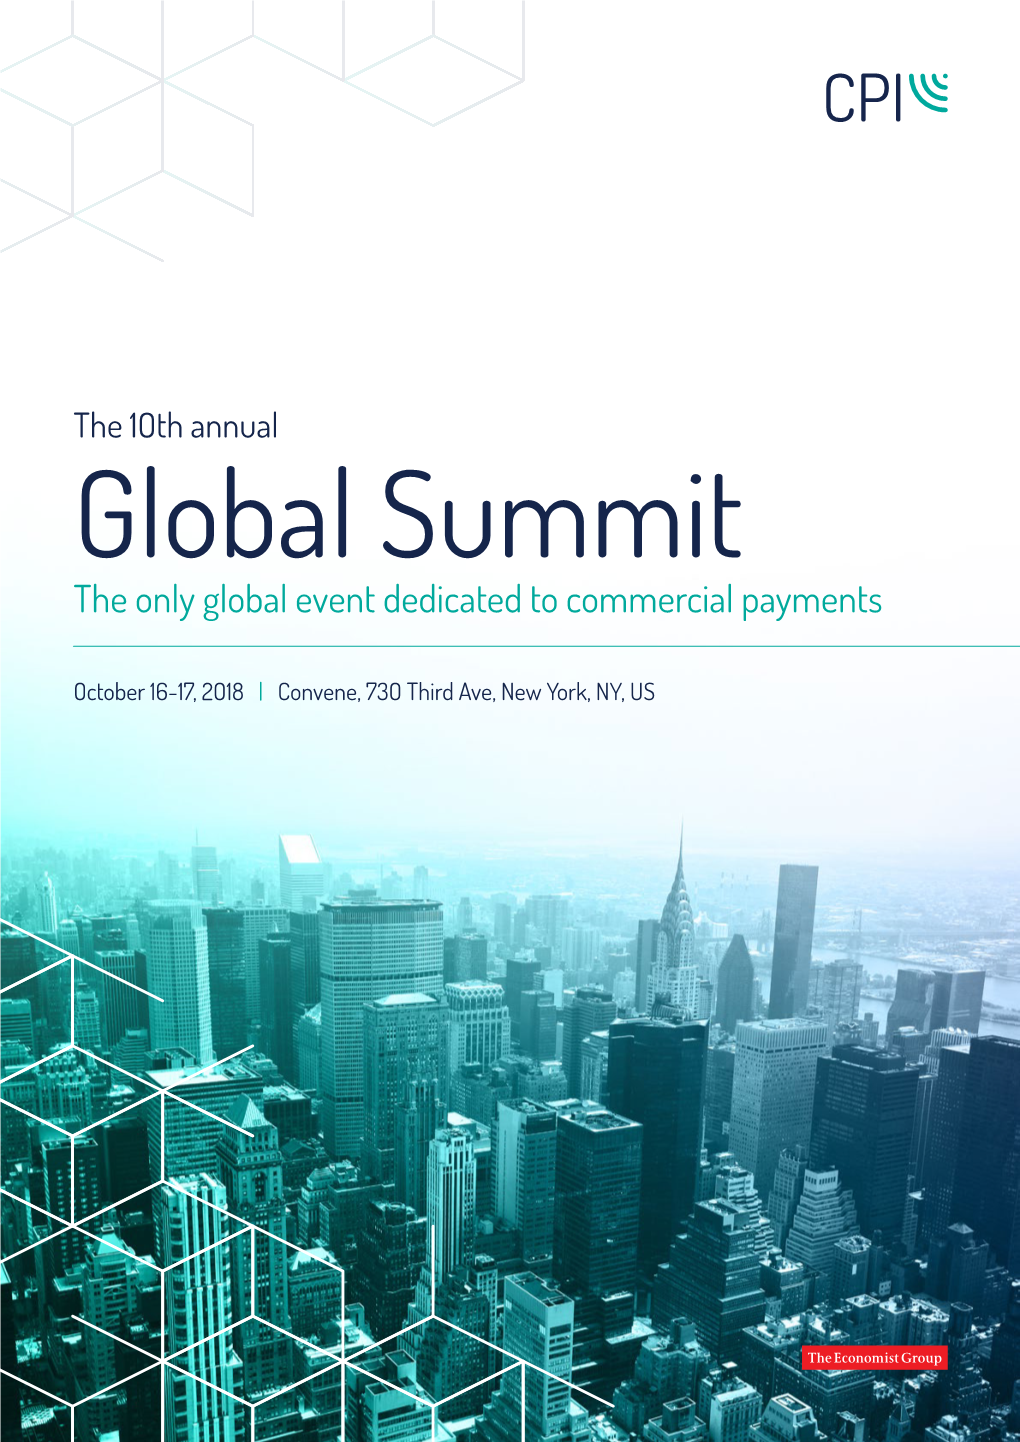 The Only Global Event Dedicated to Commercial Payments